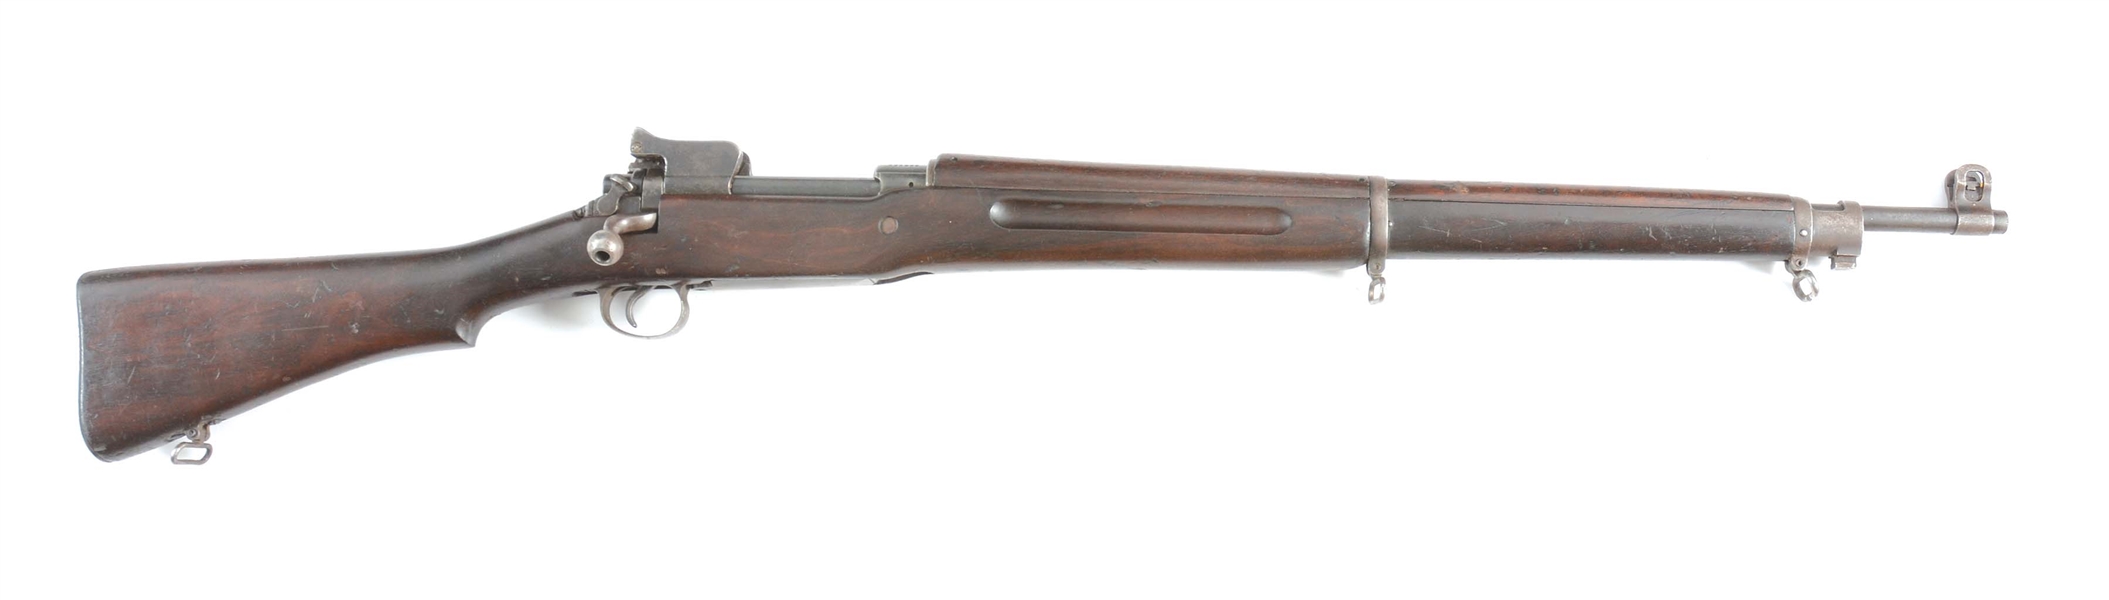 (C) WINCHESTER 1917 BOLT ACTION MILITARY RIFLE.